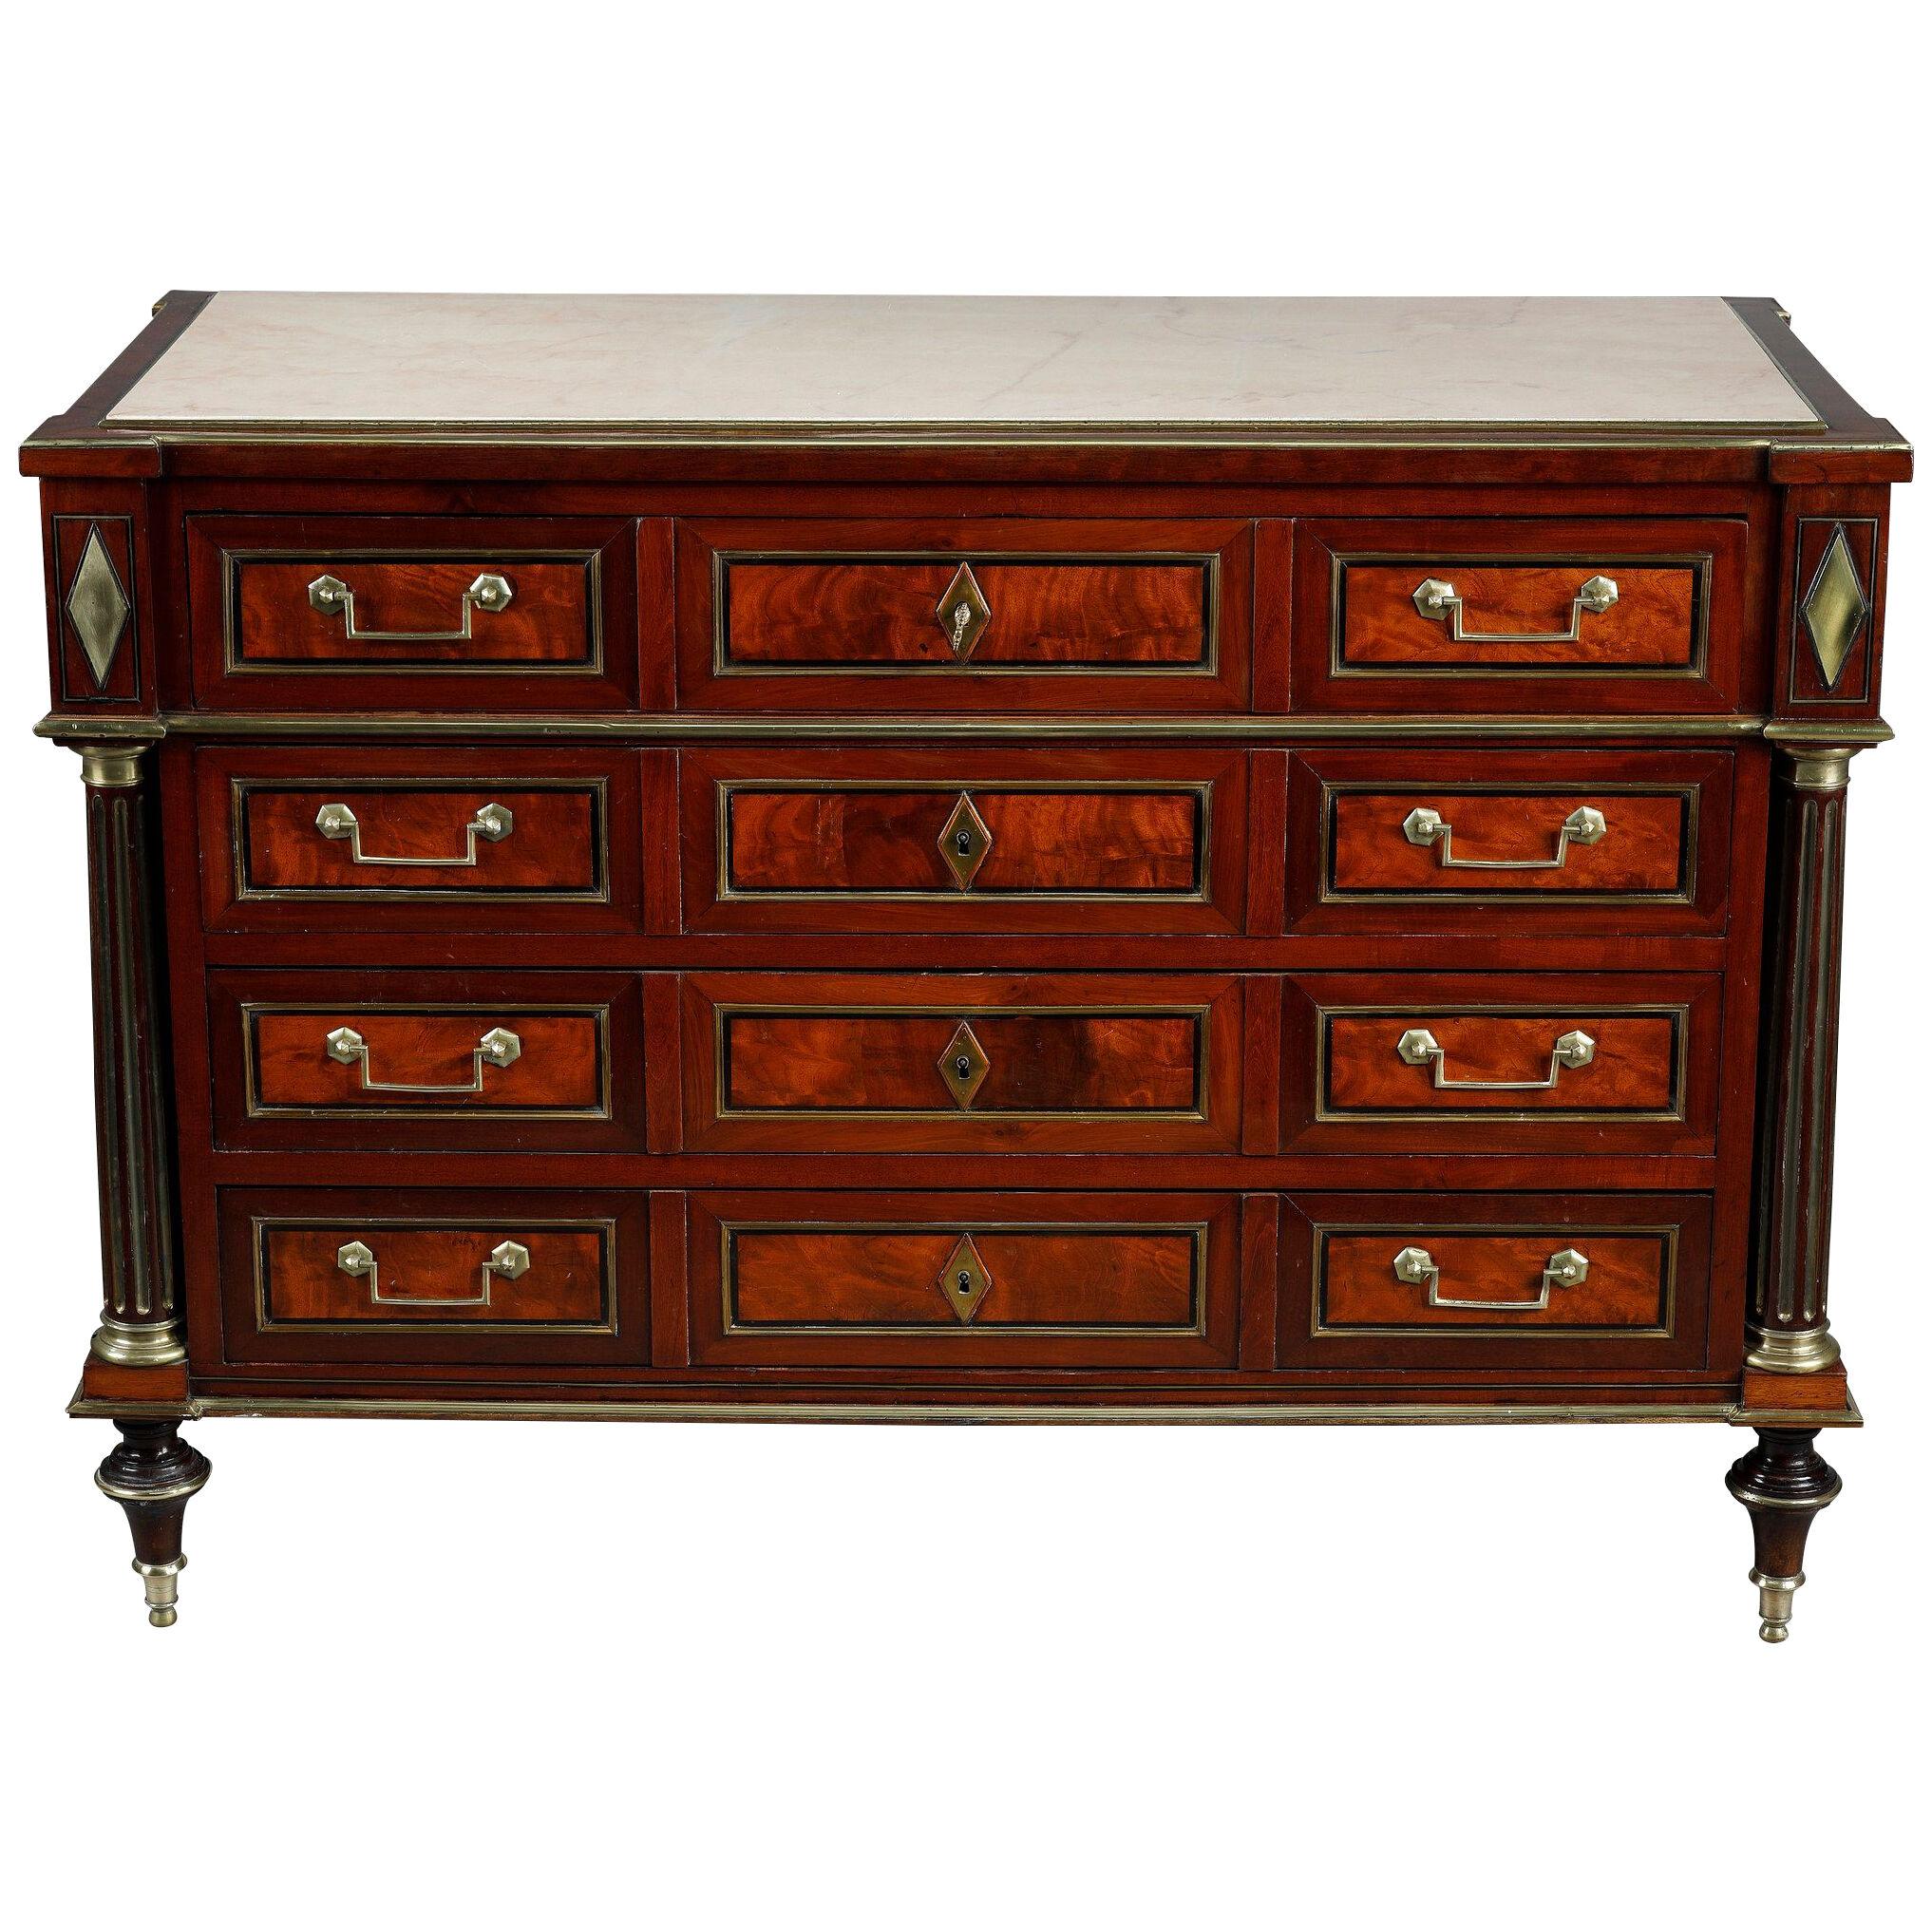 Louis XVI commode in mahogany veneer and brass marquetry